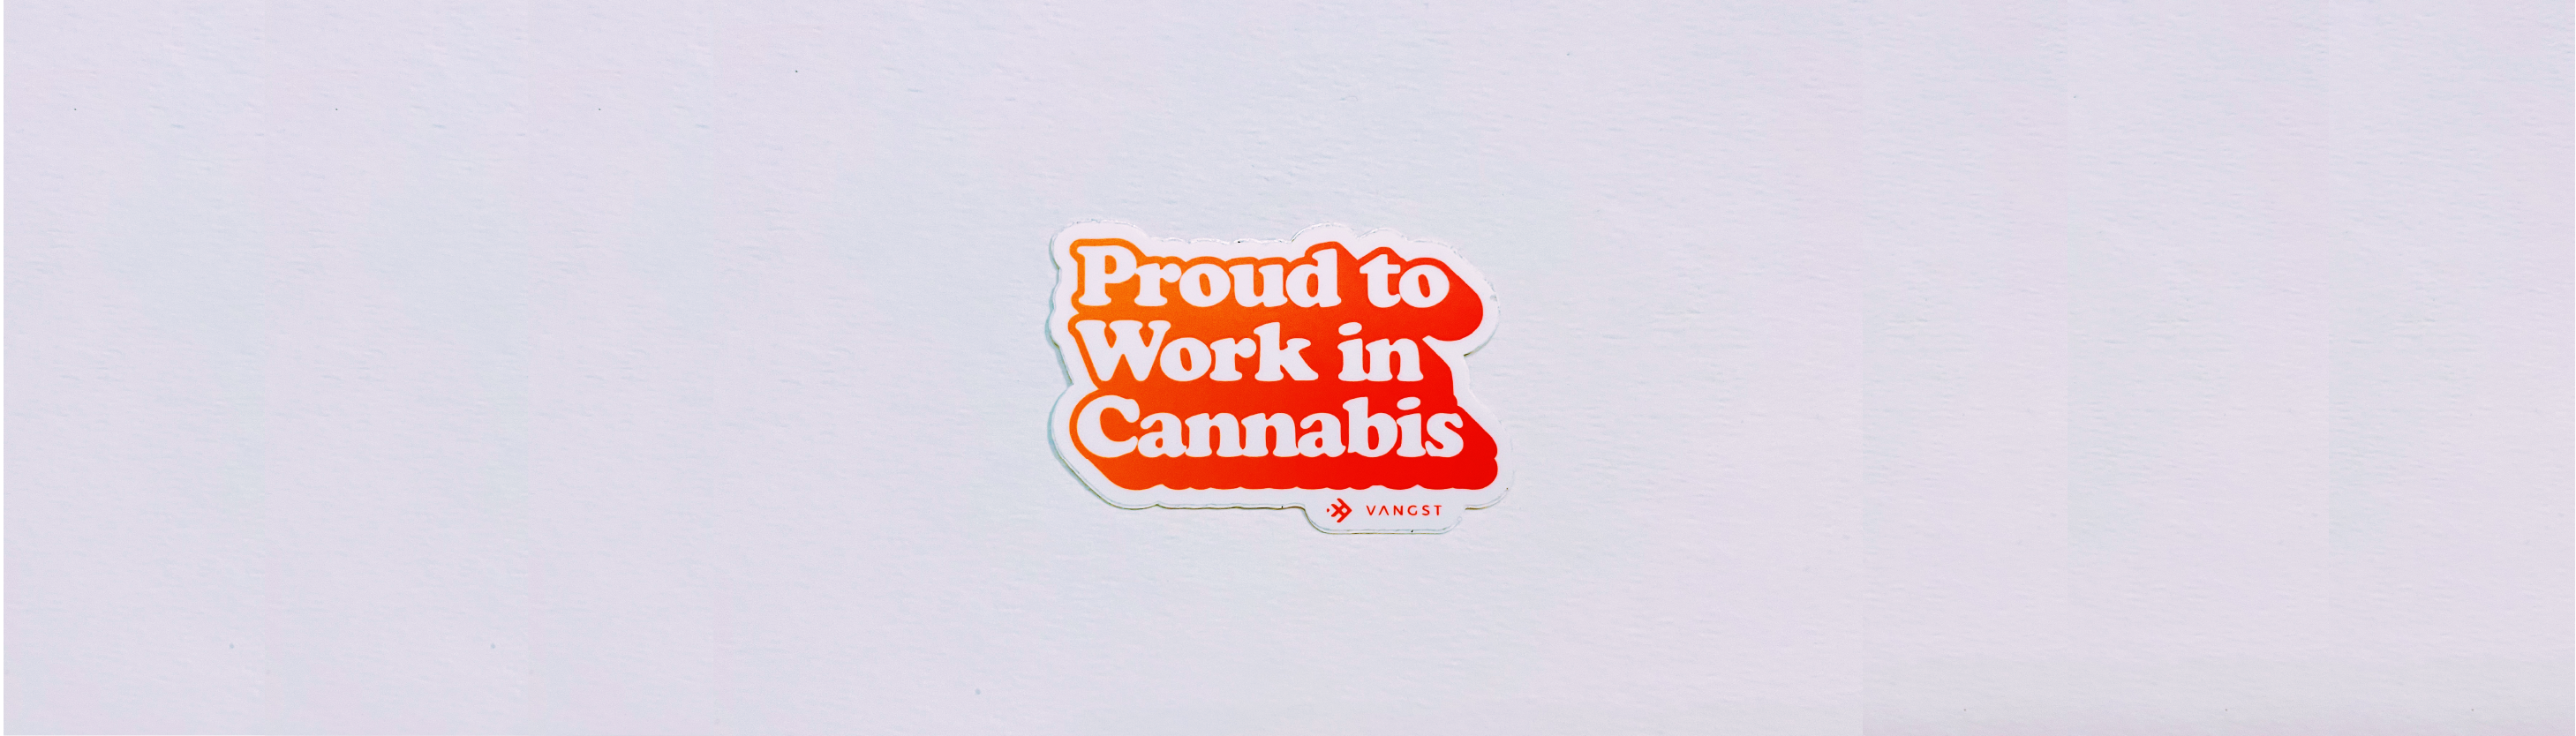 A Deep Dive Into 4/20: Proud to Work in Cannabis with Vangst